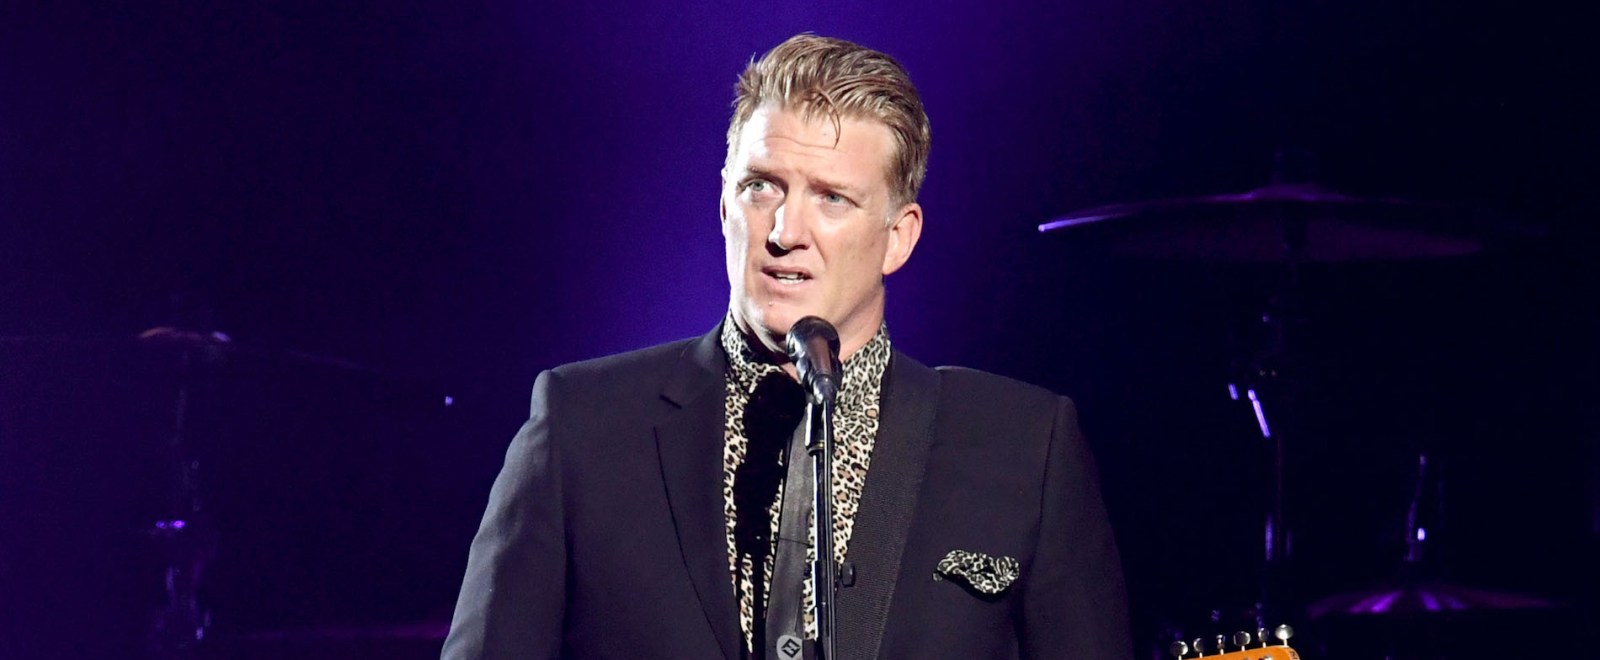 josh-homme-queens-of-the-stone-age-getty-full.jpg